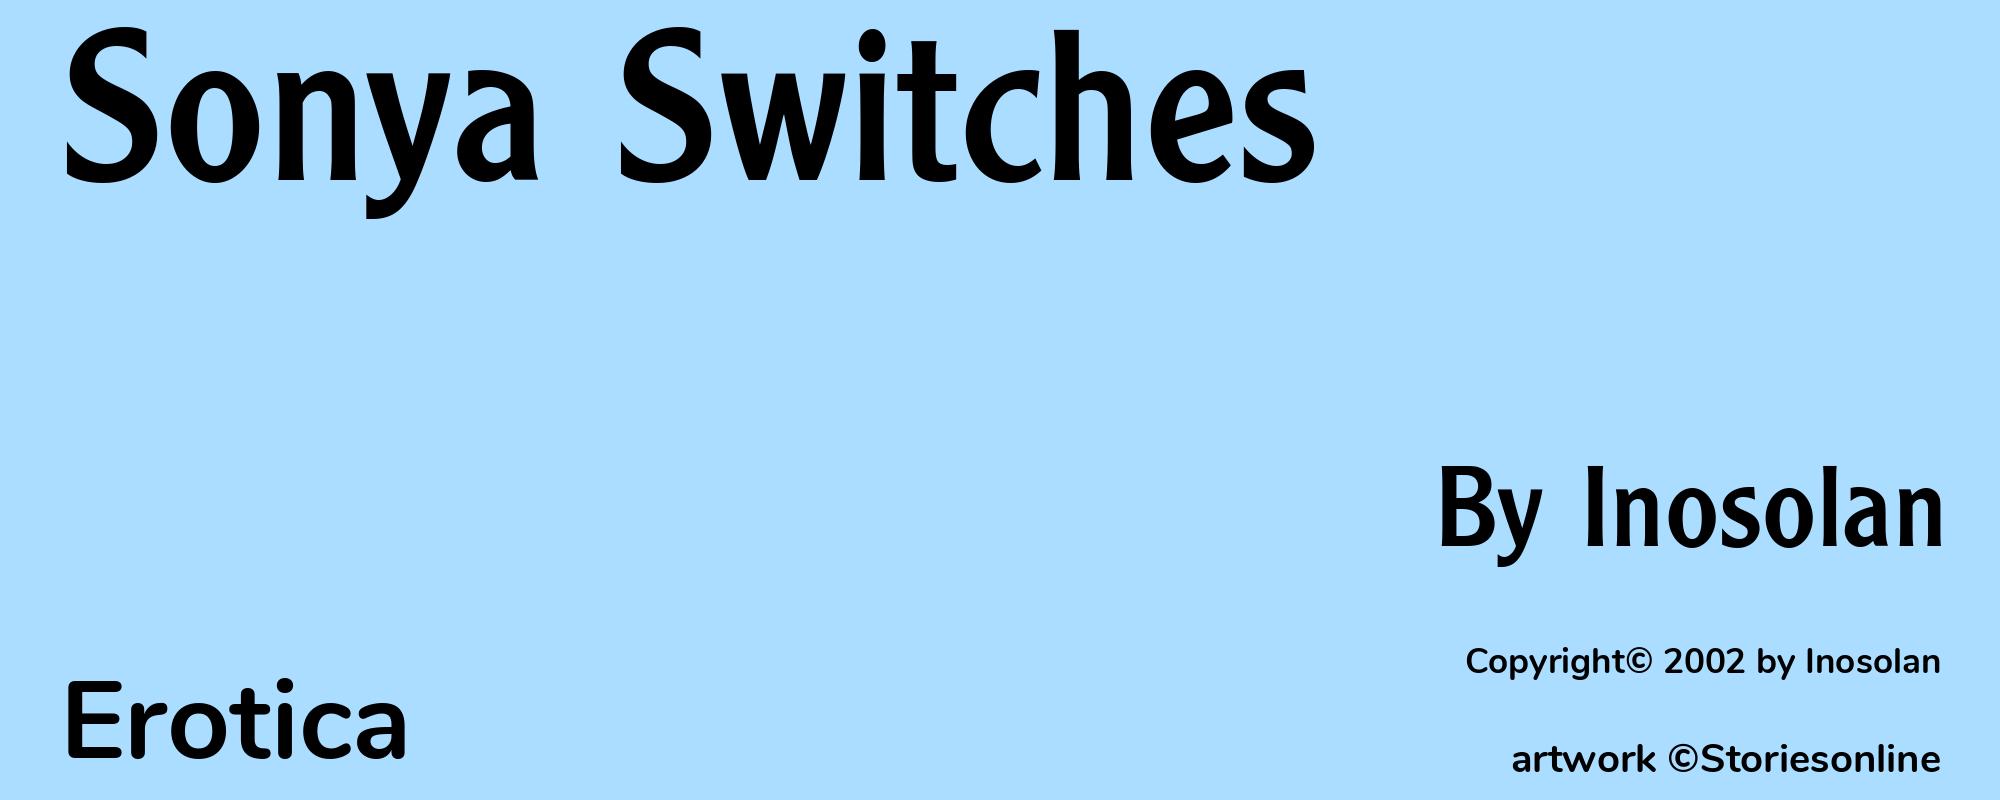 Sonya Switches - Cover